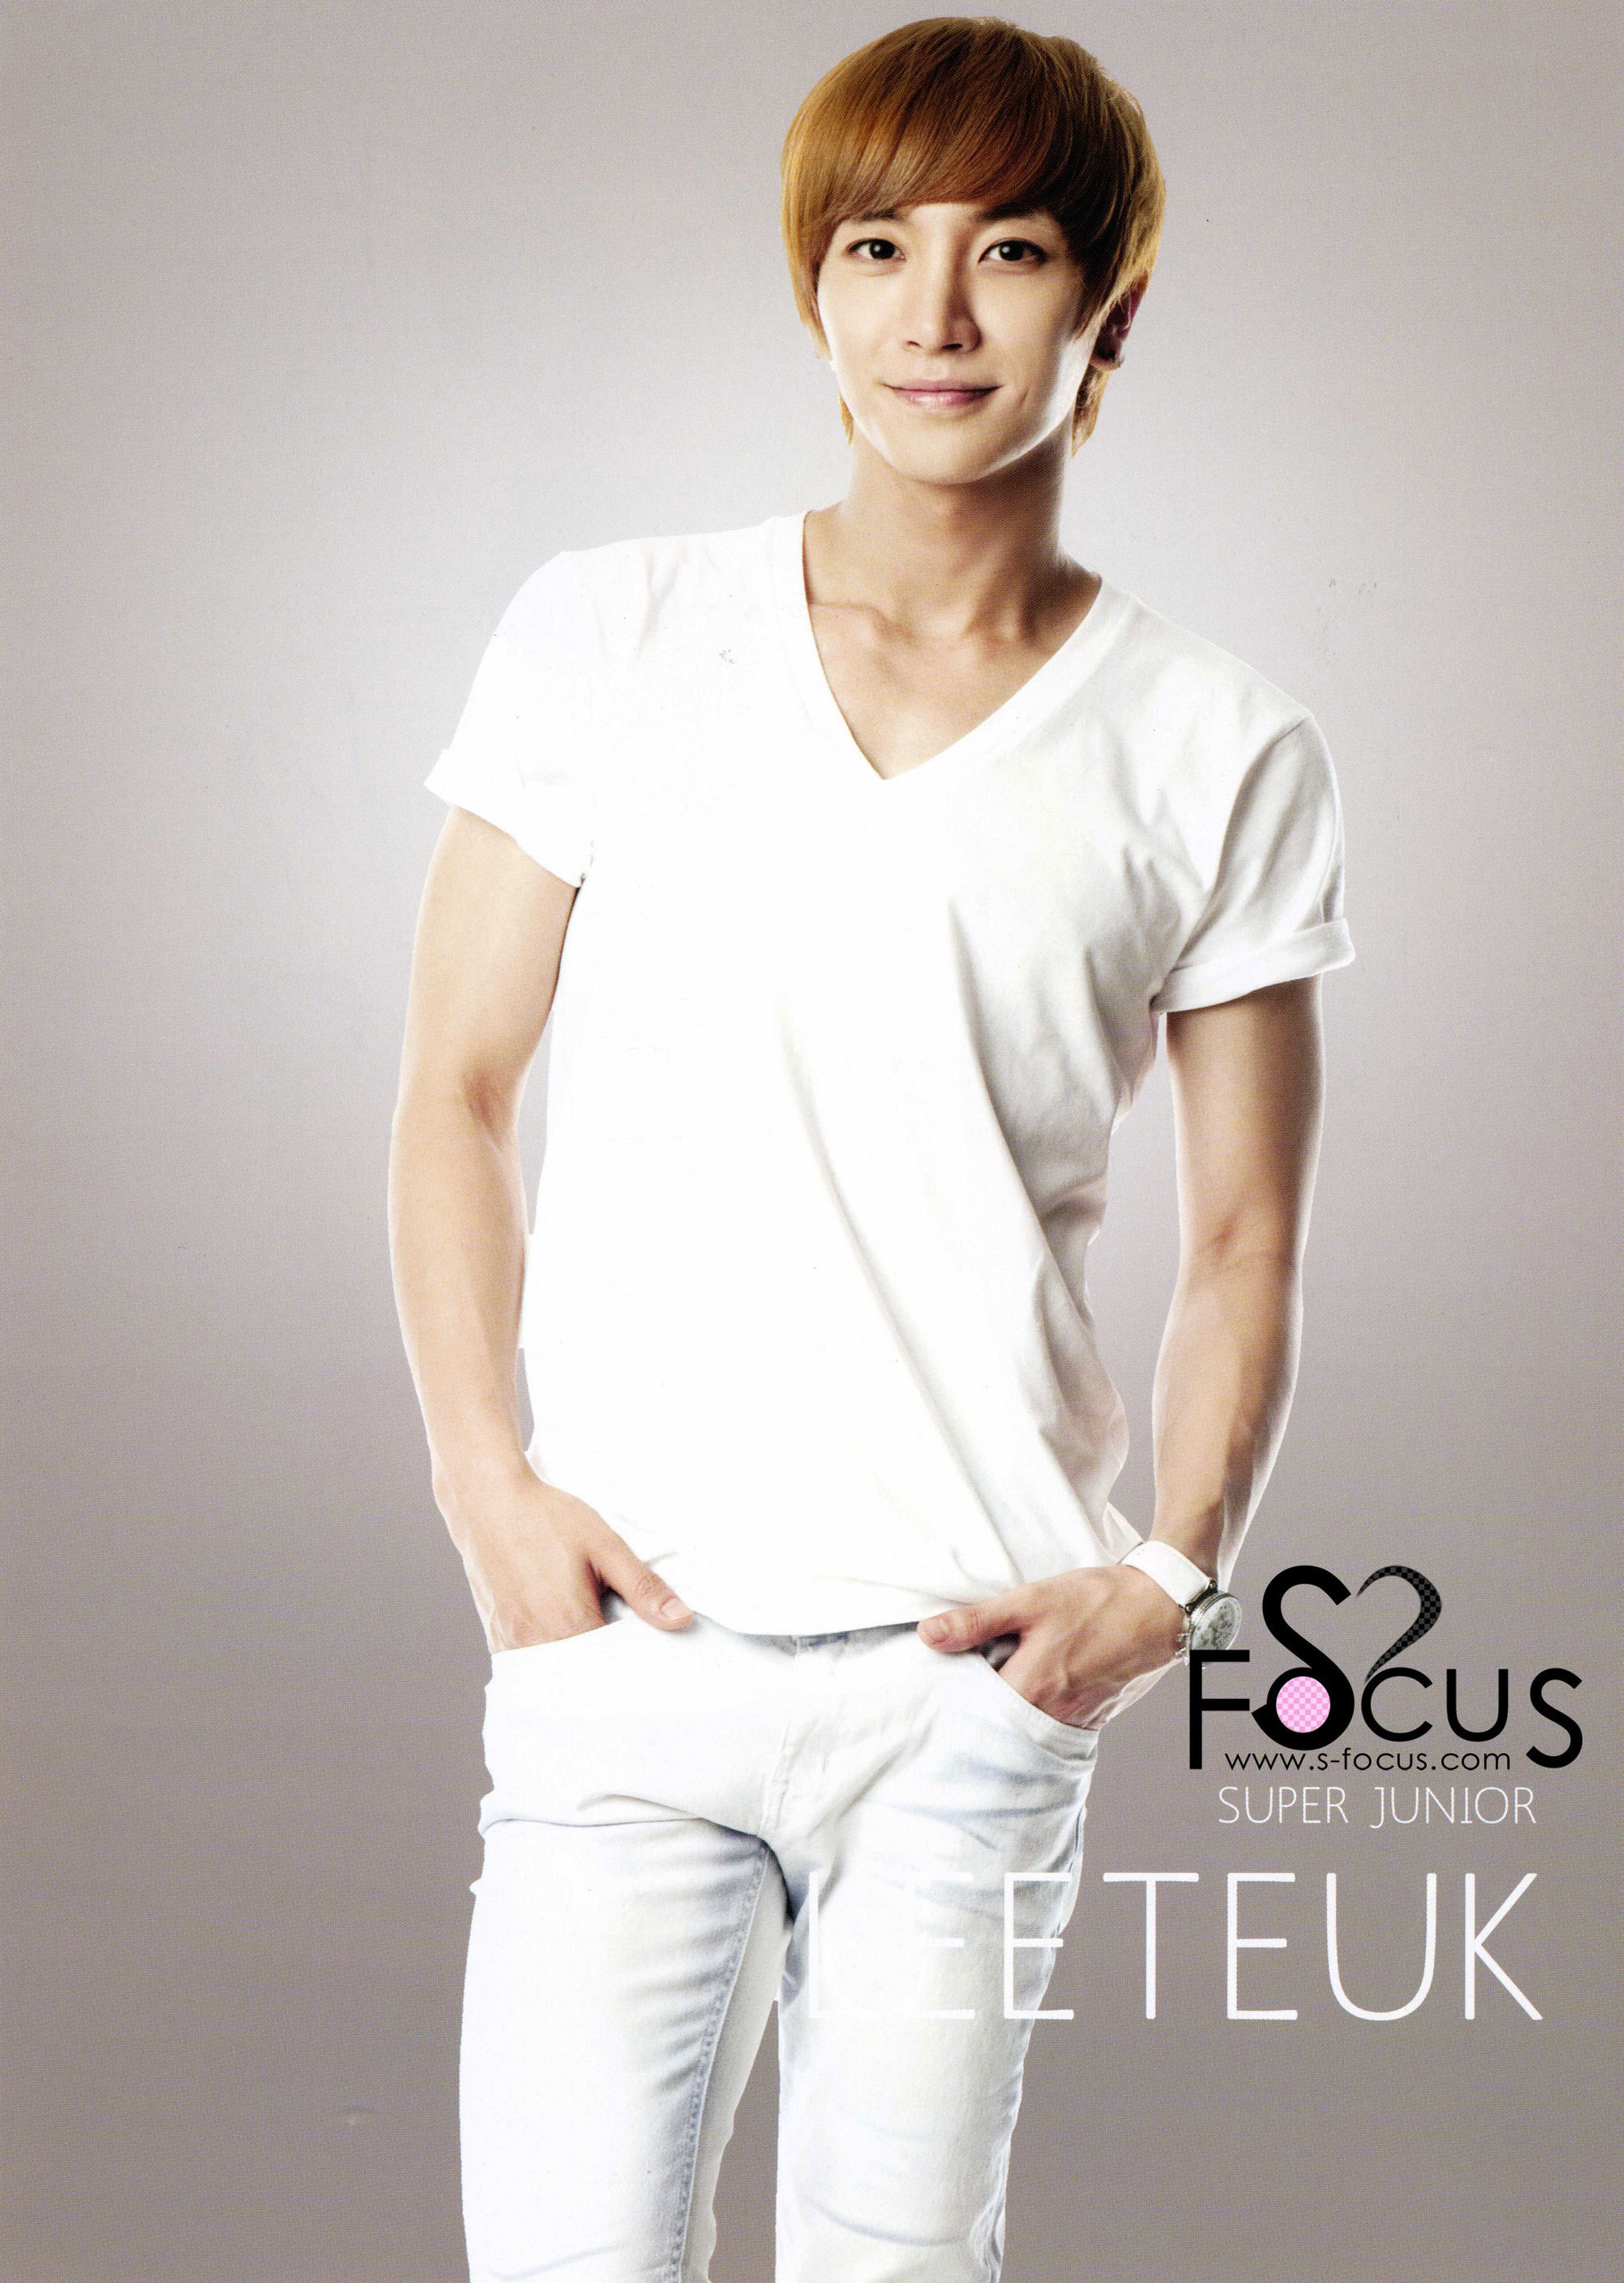 Lee Teuk - Picture Actress